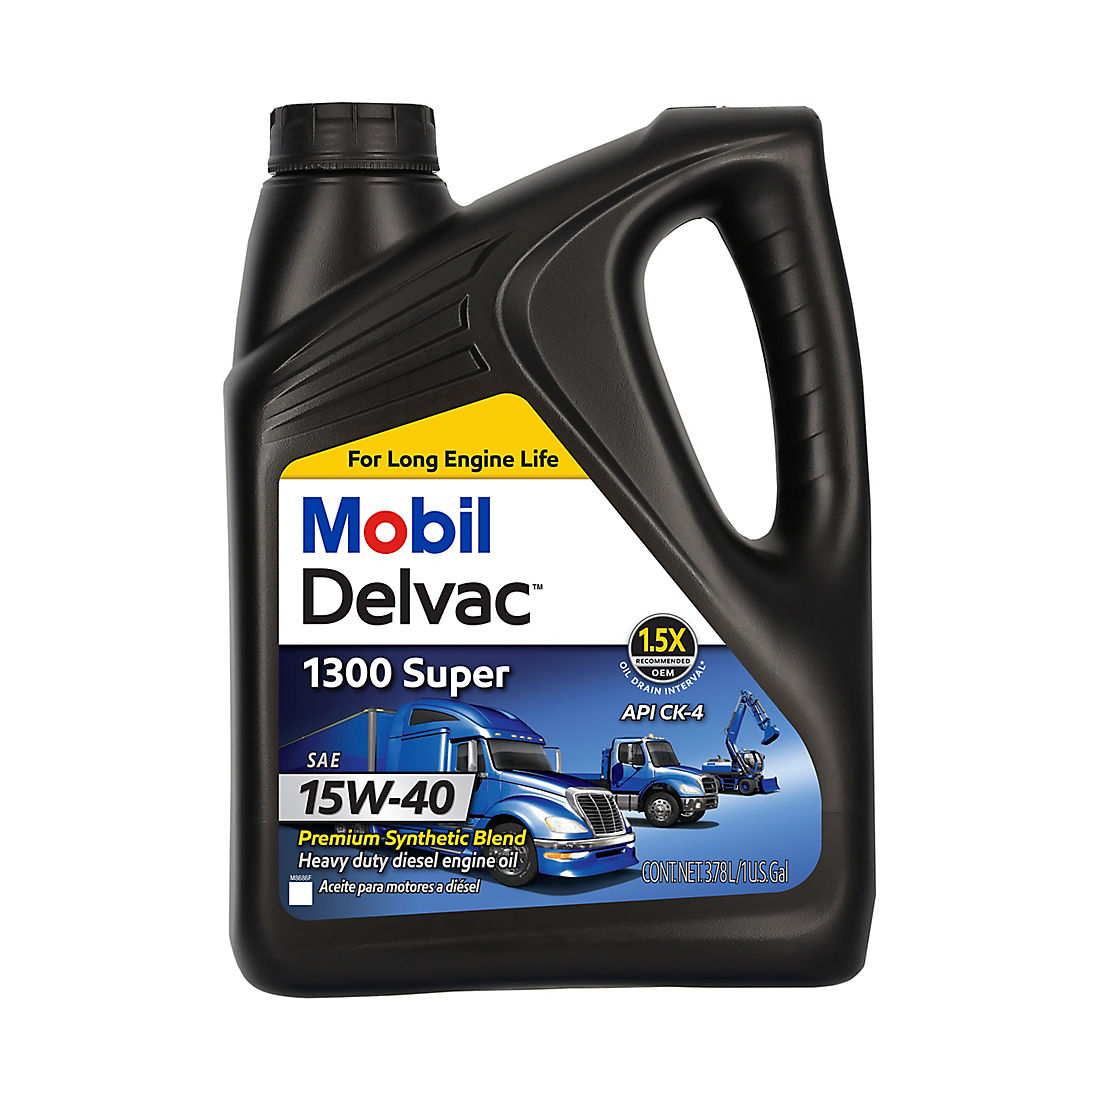 Масло 15 w. Mobil Delvac 10w 40 Diesel. Mobil 10w 40 Synthetic engine Oil. Мобил Делвак 10w 50. Oil Motor SAE 15w40.